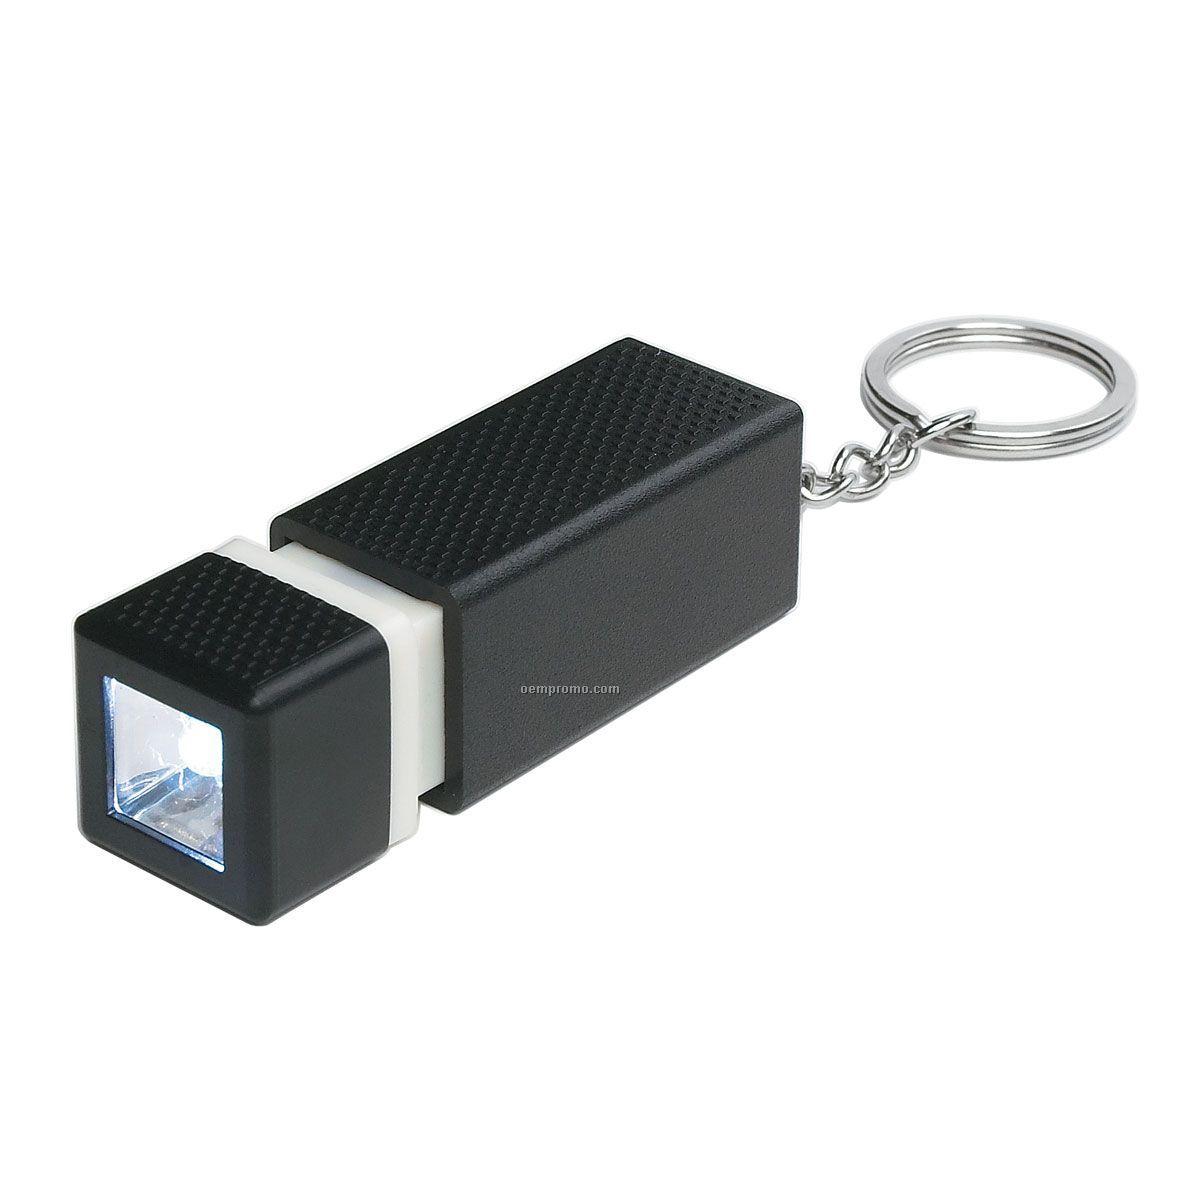 Square Pull Out Flashlight Keychain - Black